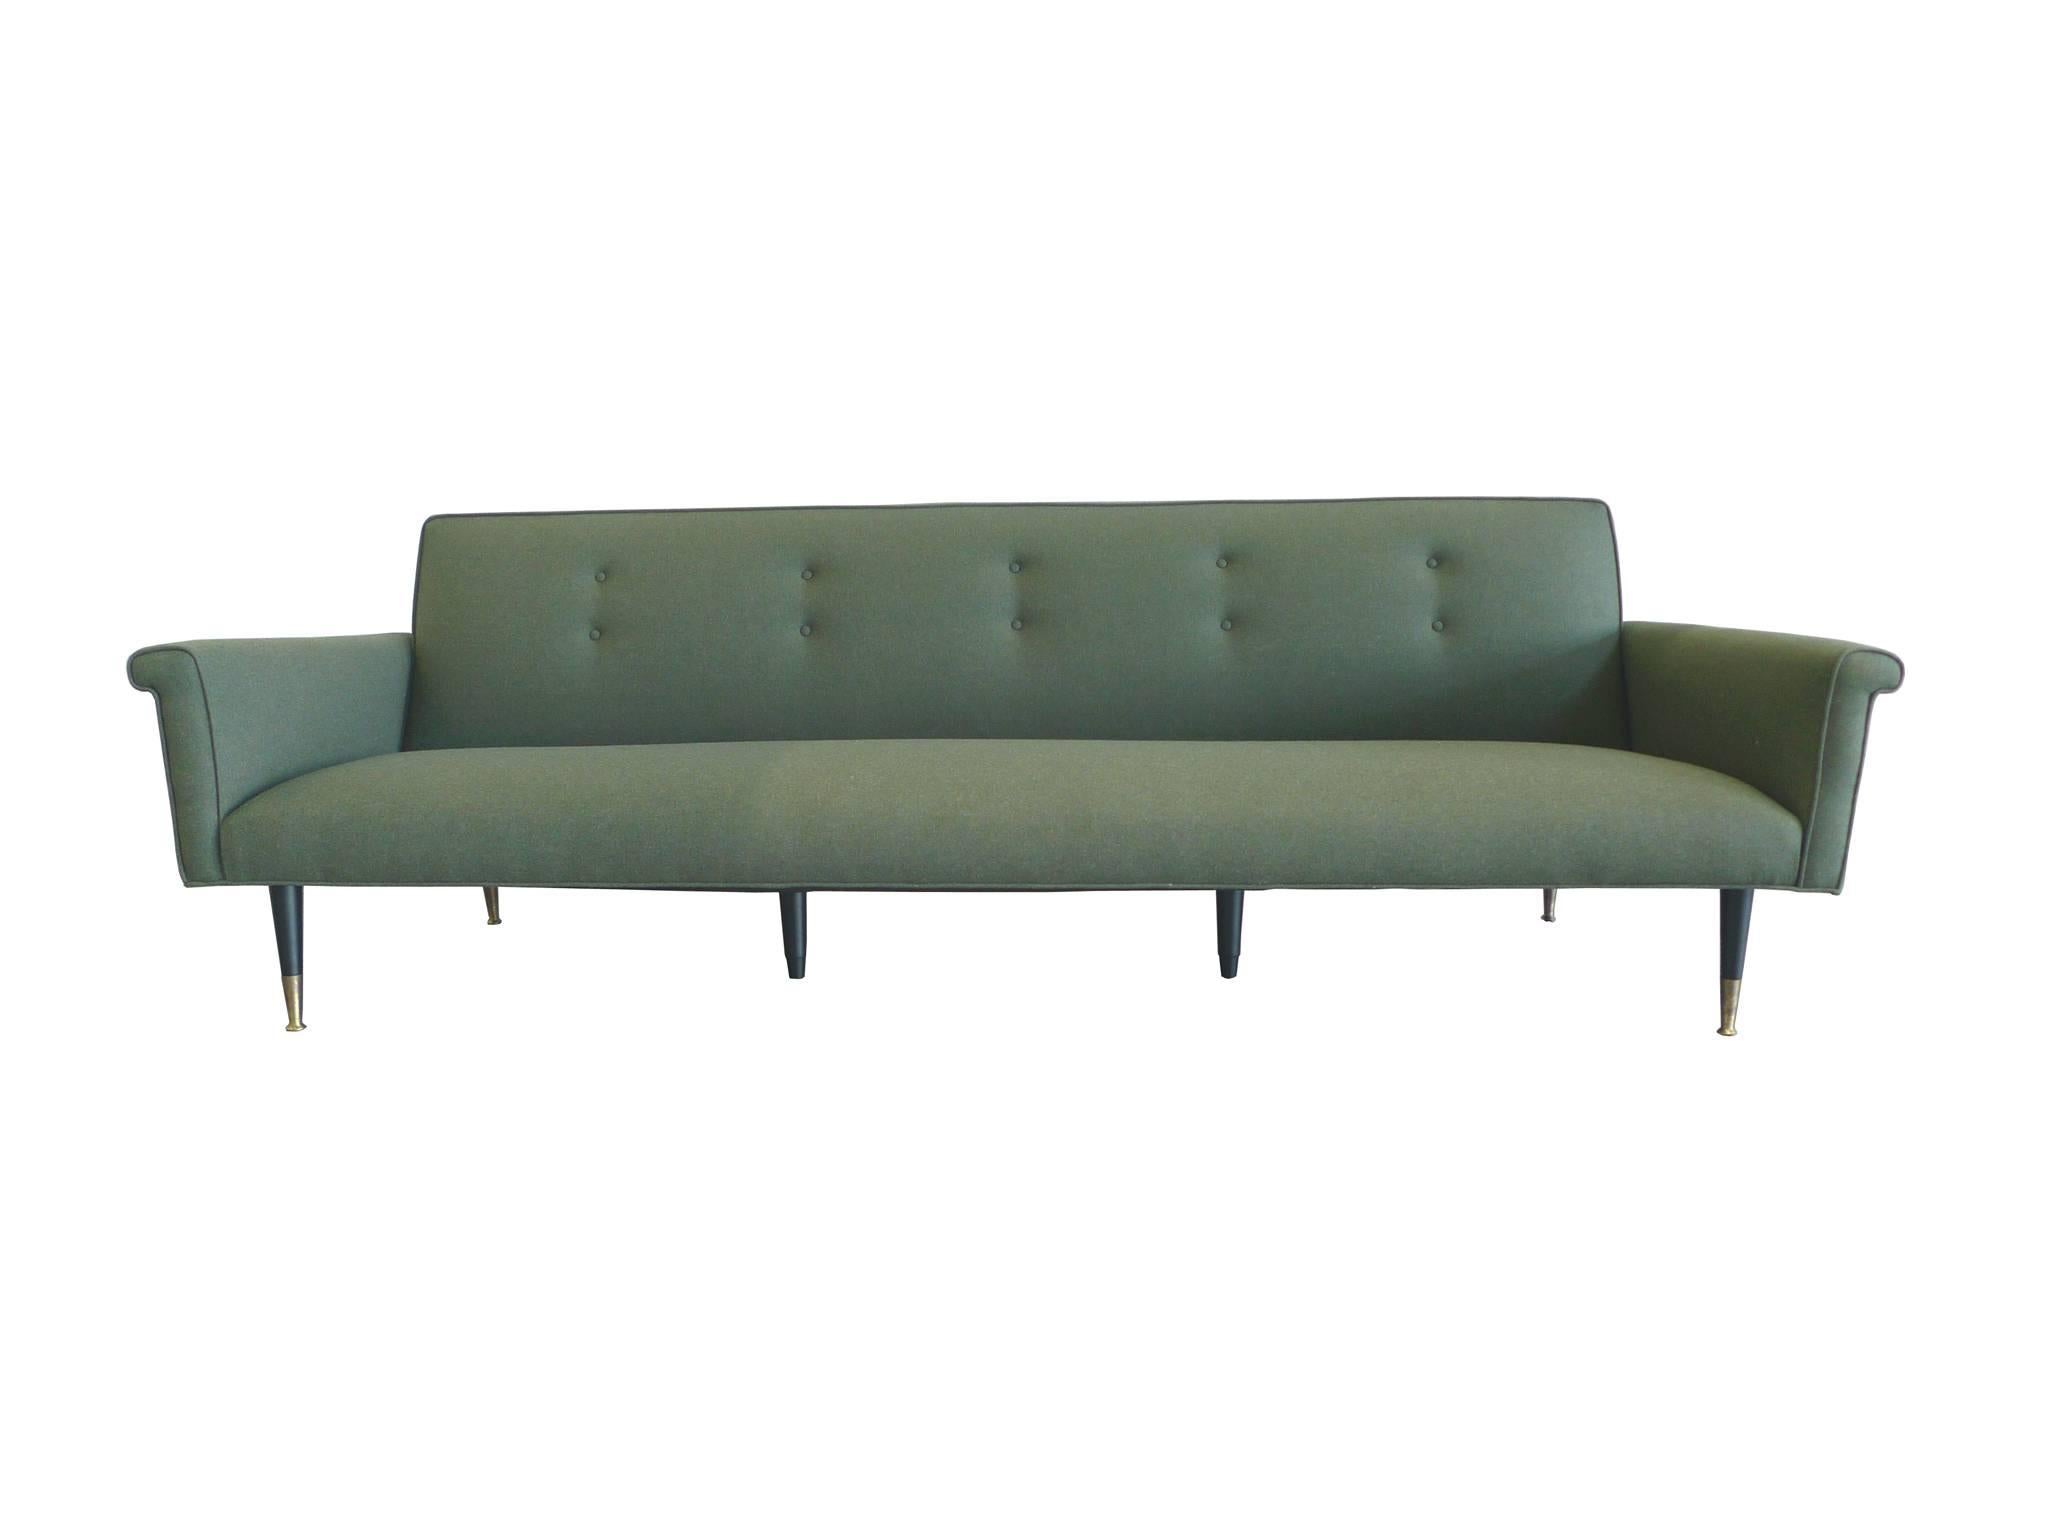 This handsome 1960s sofa is newly reupholstered in a Duralee moss-green wool. Its minimal design takes after the style of Edward Wormley: smooth shapes contoured by elegant piping, a tufted back cushion, and tapering wooden legs with brass accents.